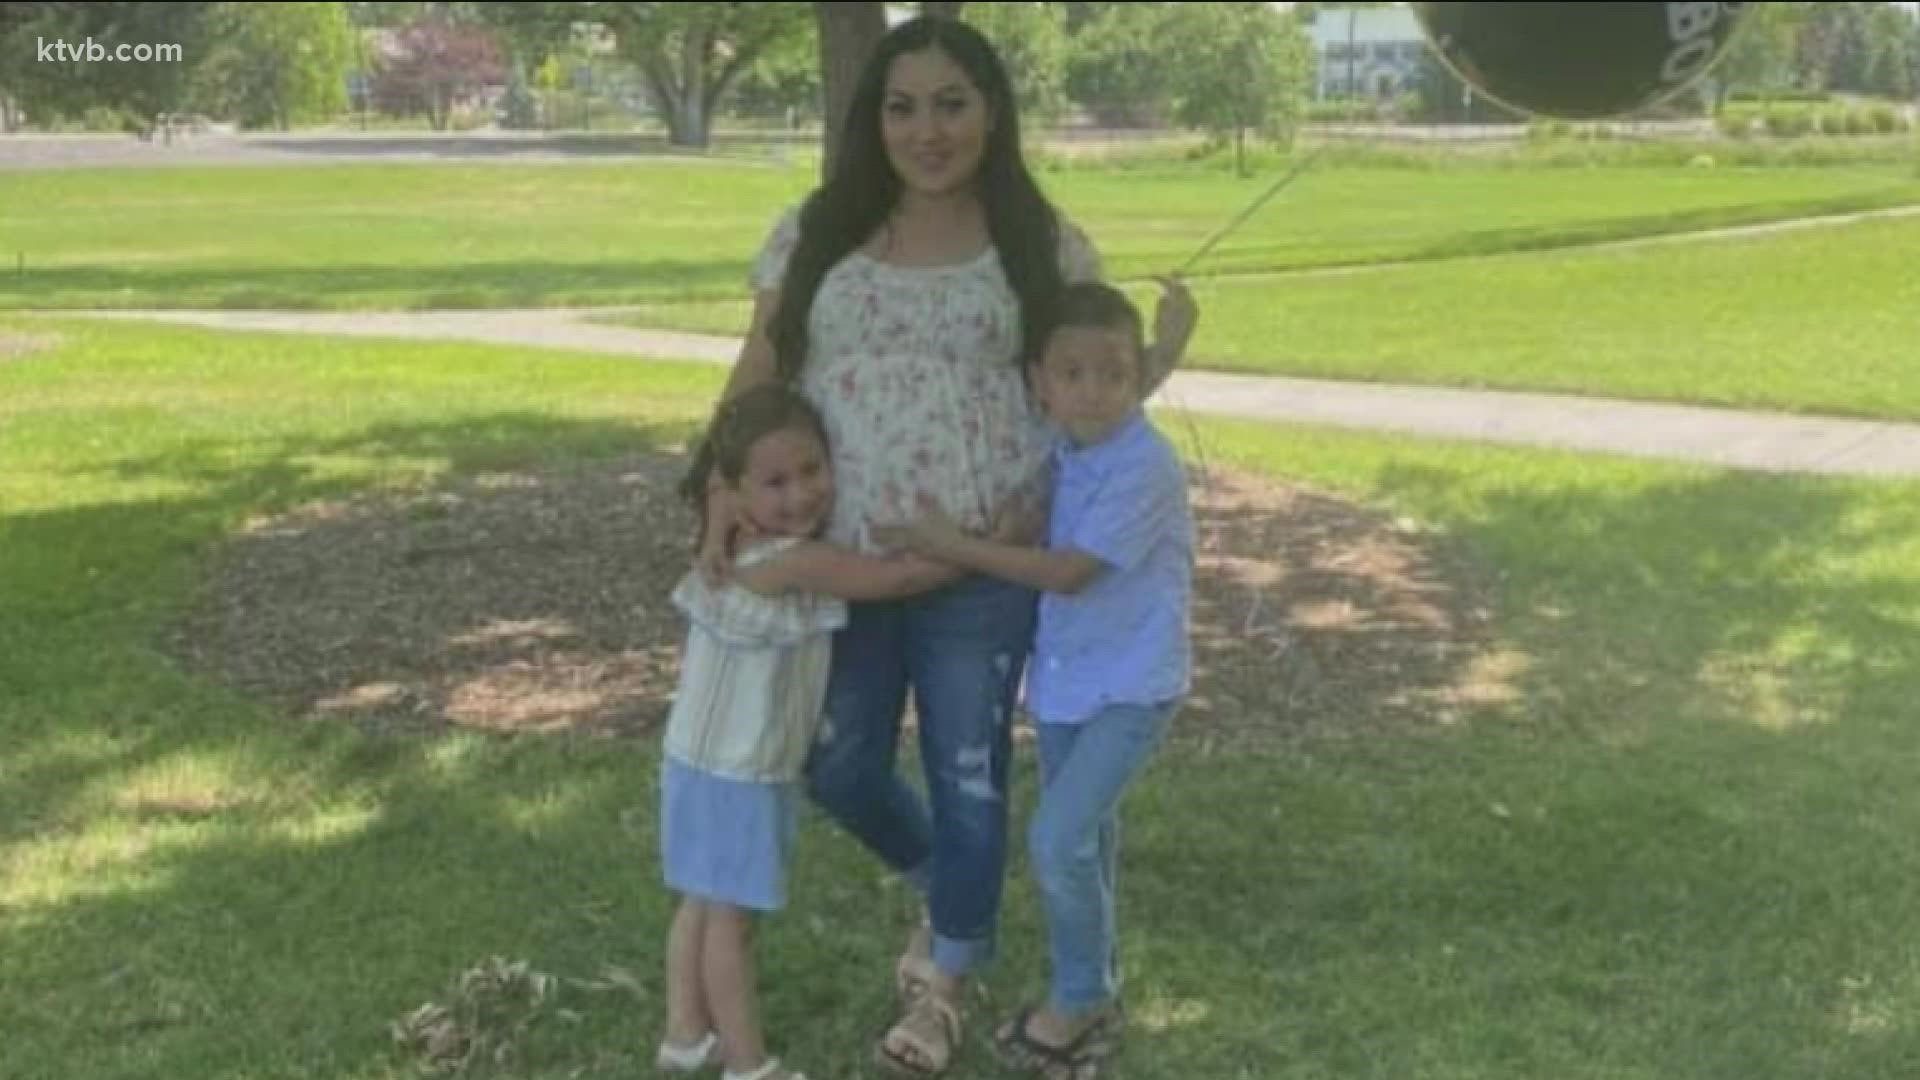 Kimberly Rangel did not get vaccinated because she was concerned about harming her unborn baby, but the CDC is recommending the vaccine for all pregnant women.